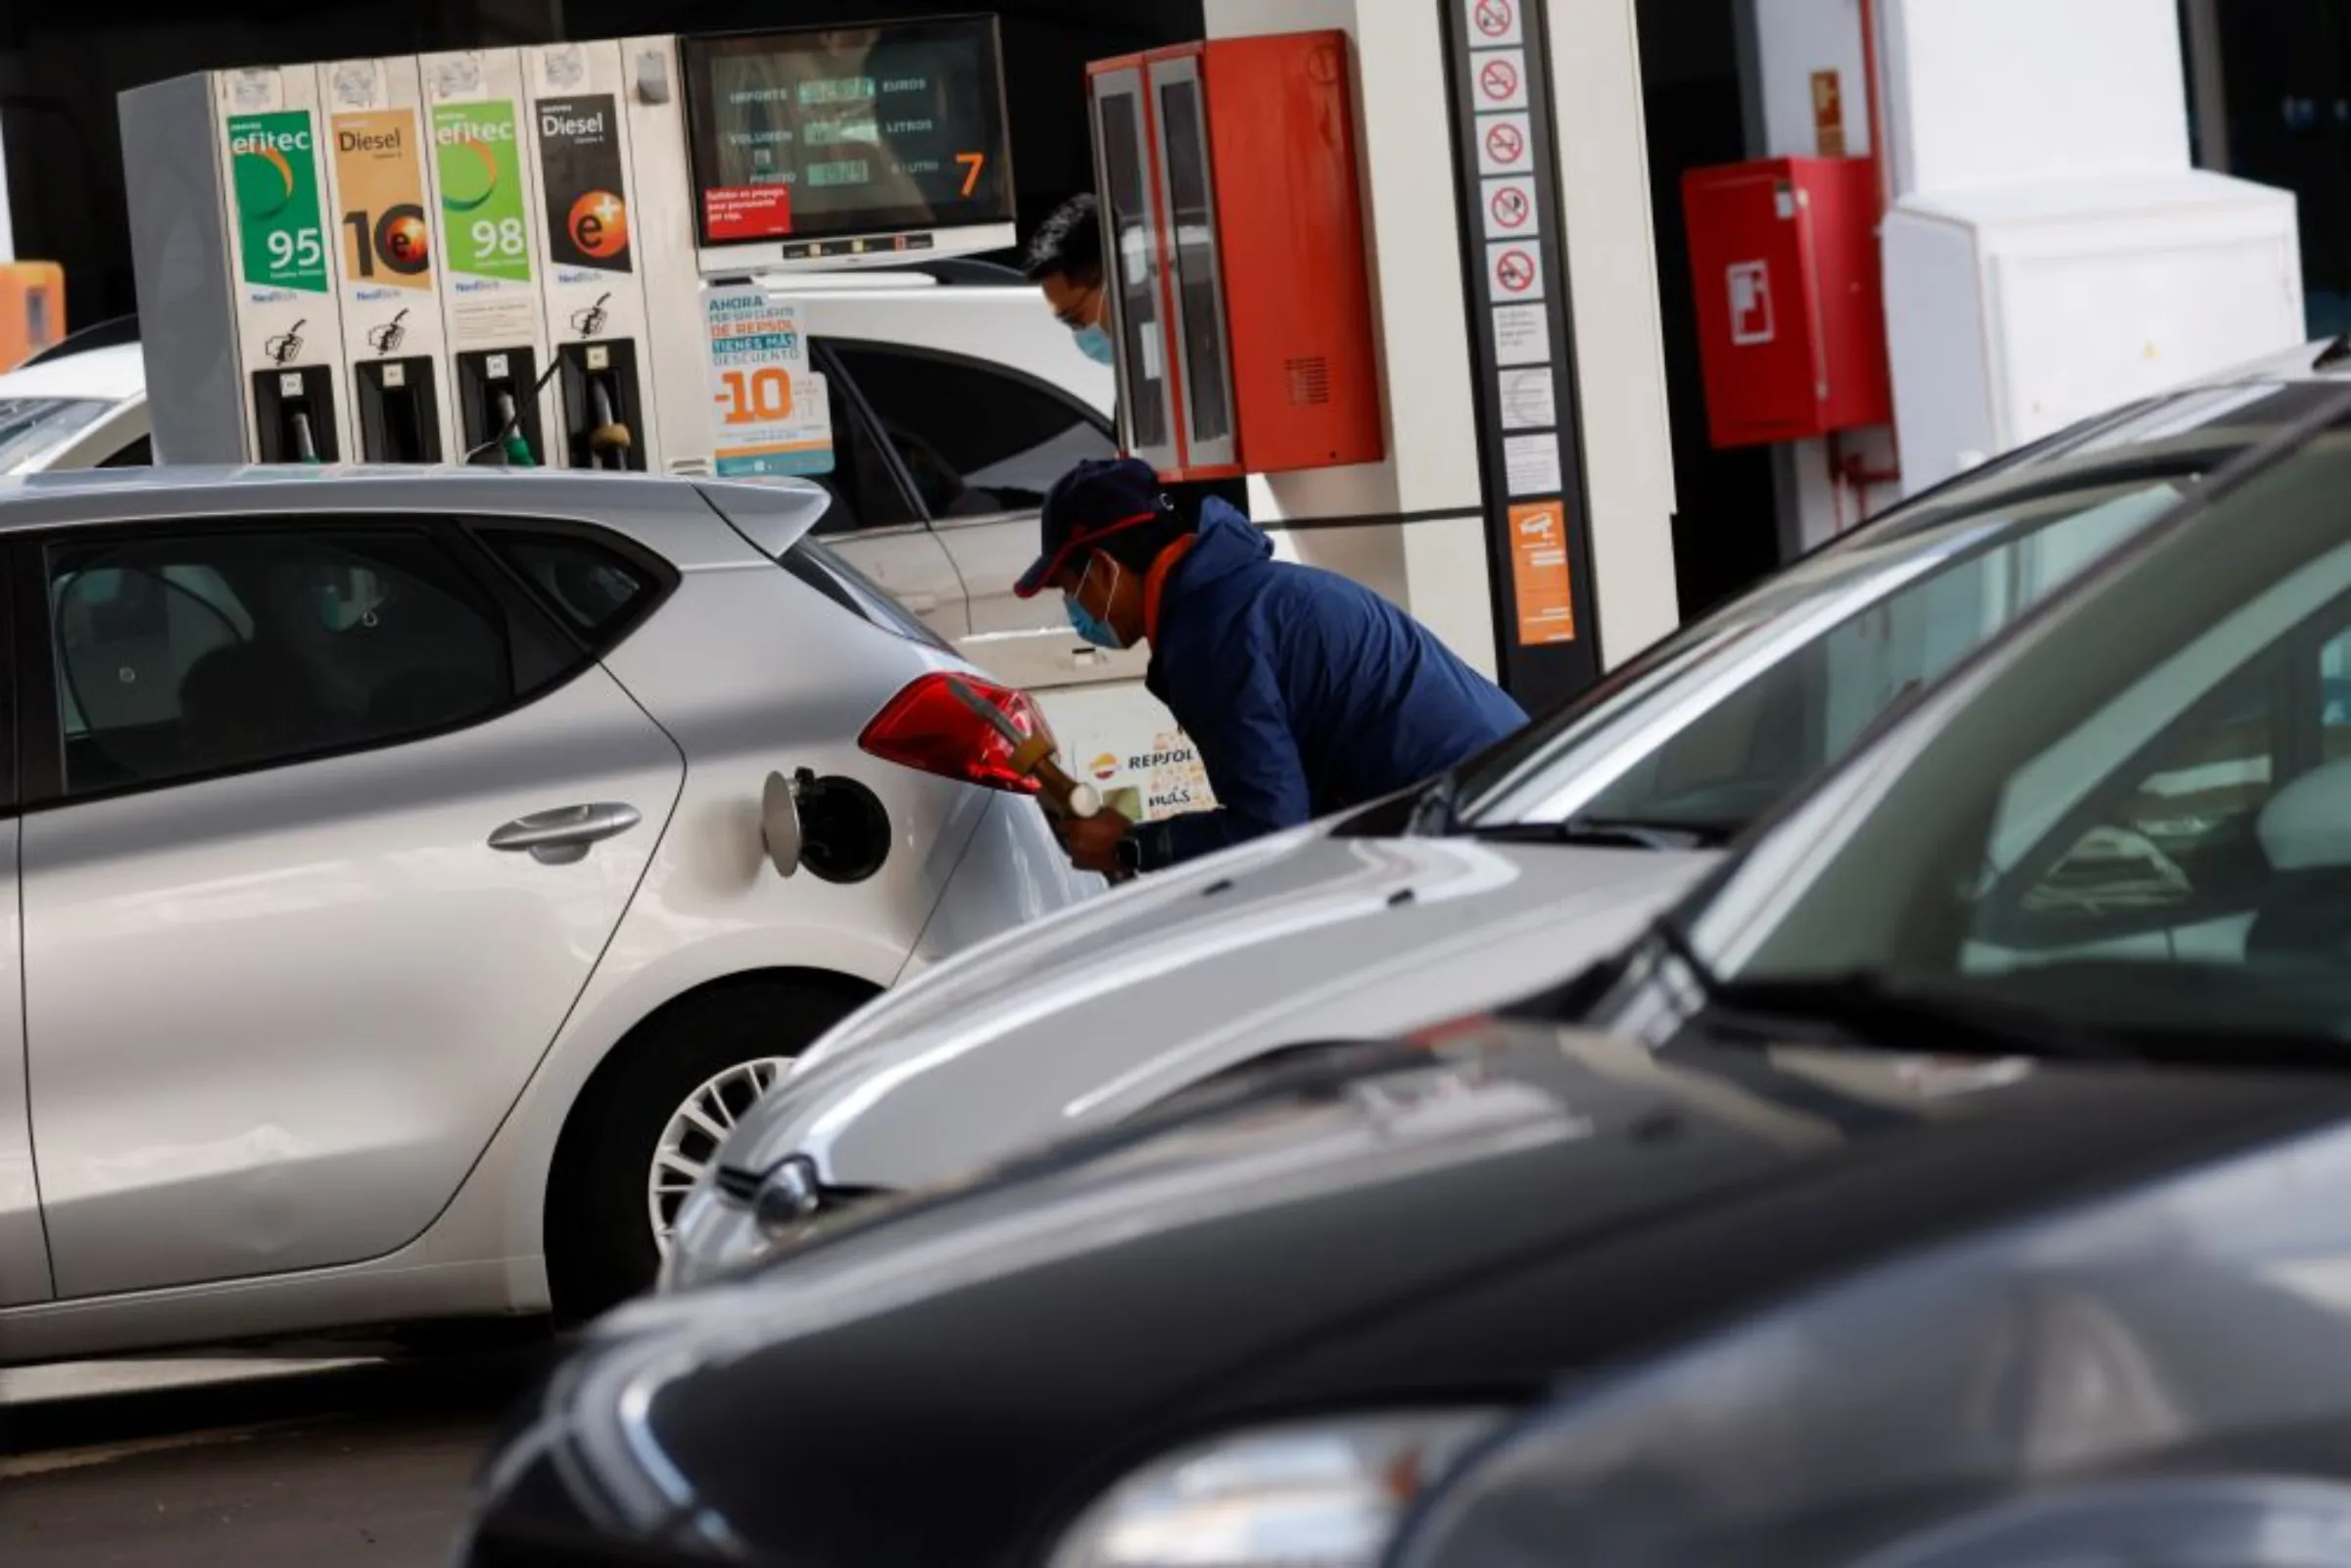 Drivers refuel at a Repsol gas station on the first day of a 20-cent-discount on each litre of fuel set by the Spanish government as part of a package of around 16 billion euros ($17.5 billion) in direct aid and soft loans to help companies and households cope with high energy prices in Madrid, Spain, April 1, 2022. REUTERS/Susana Vera